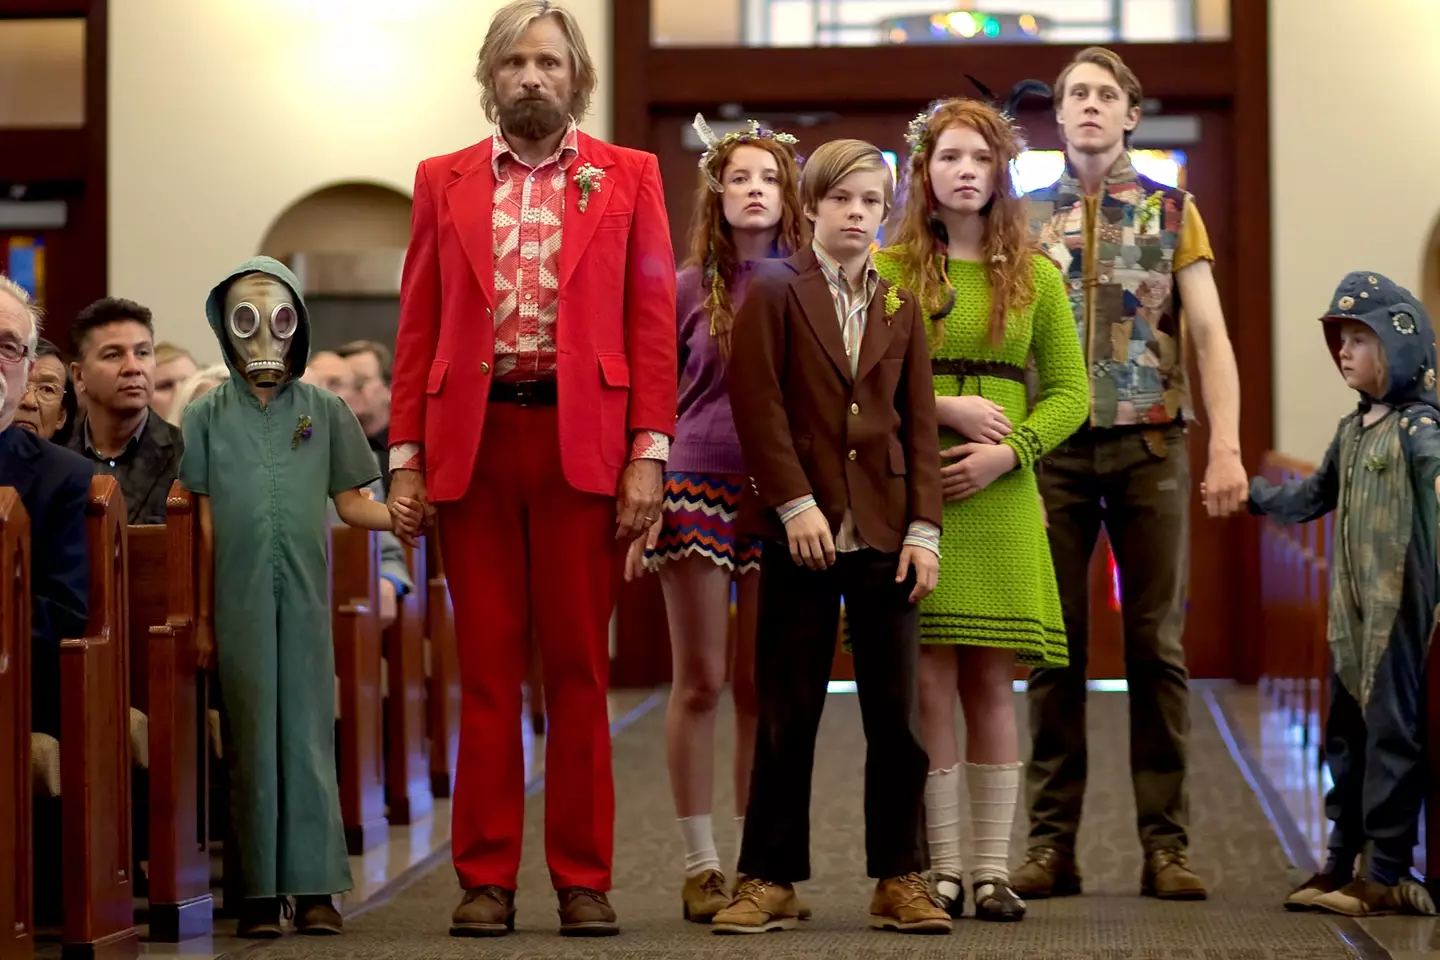 Captain Fantastic went on to be nominated for an Academy Award.